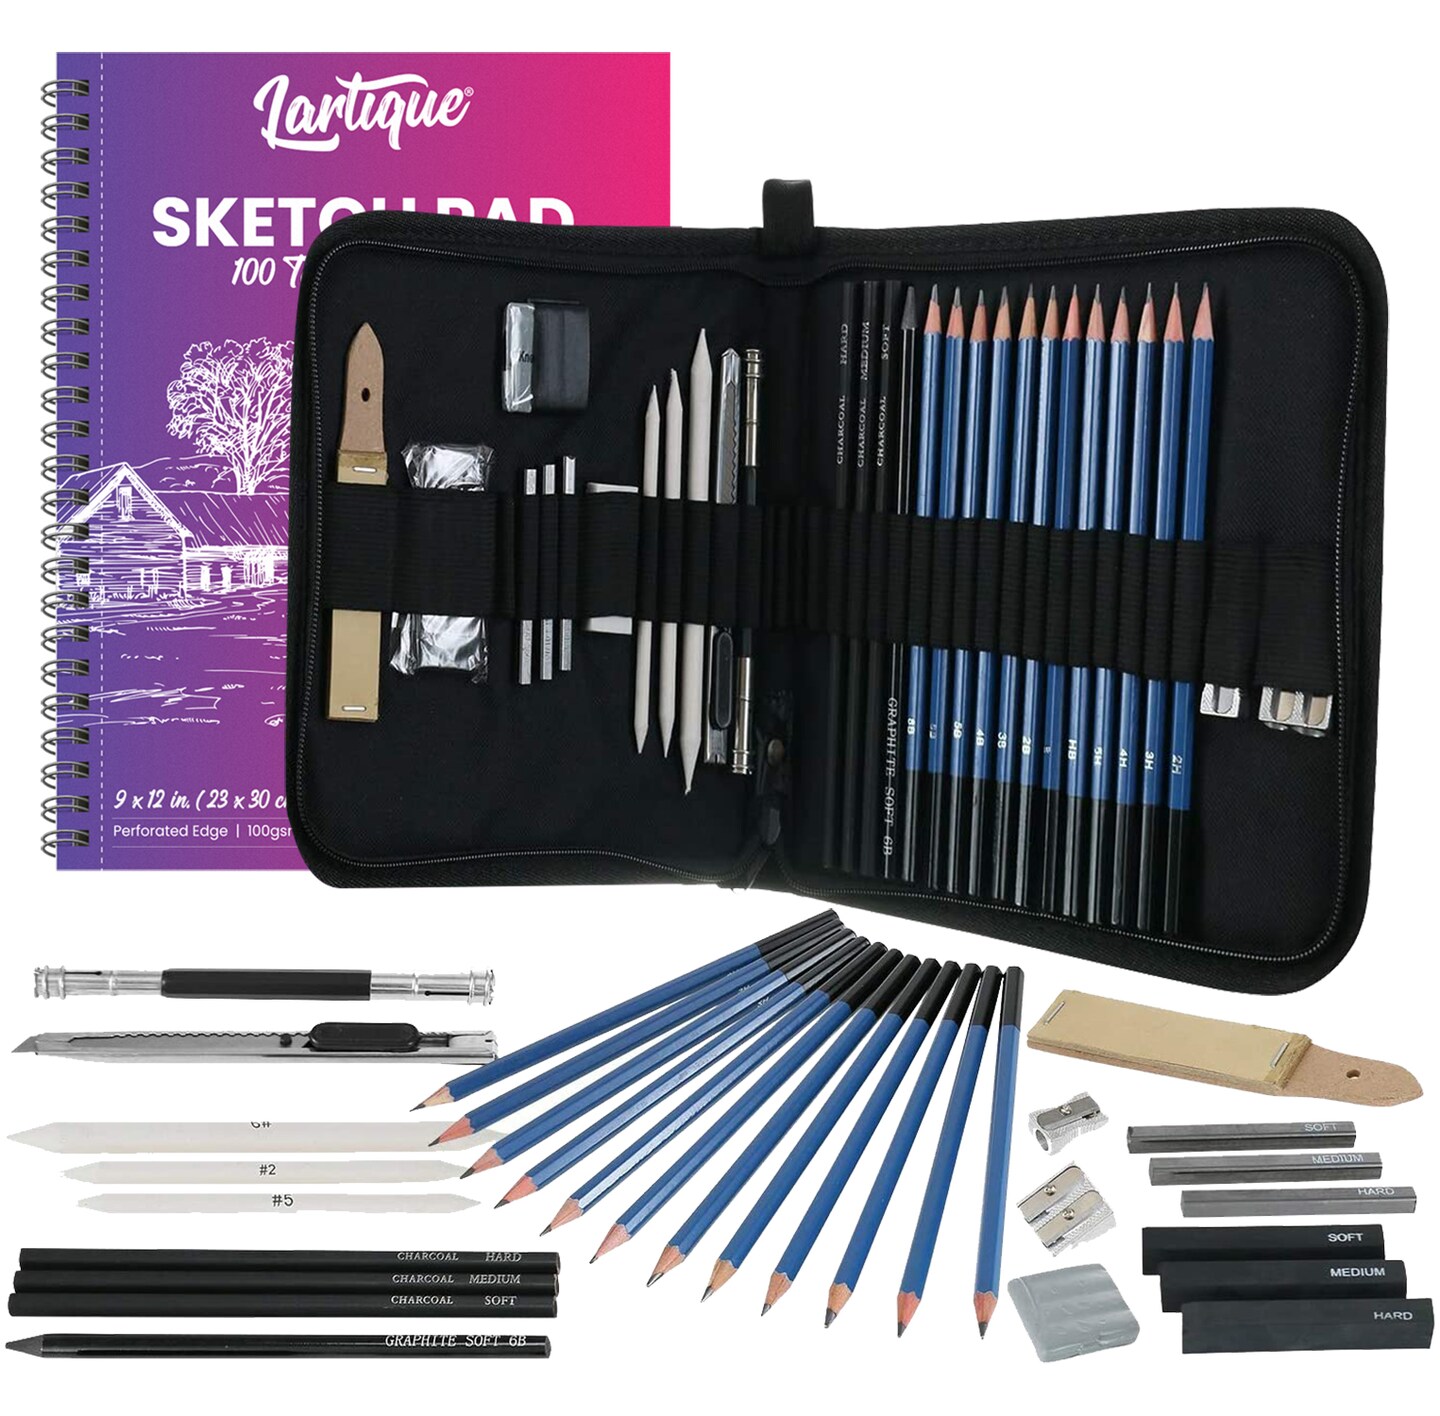 Drawing Kit Refill Pack - Pencils and Drawing Supplies